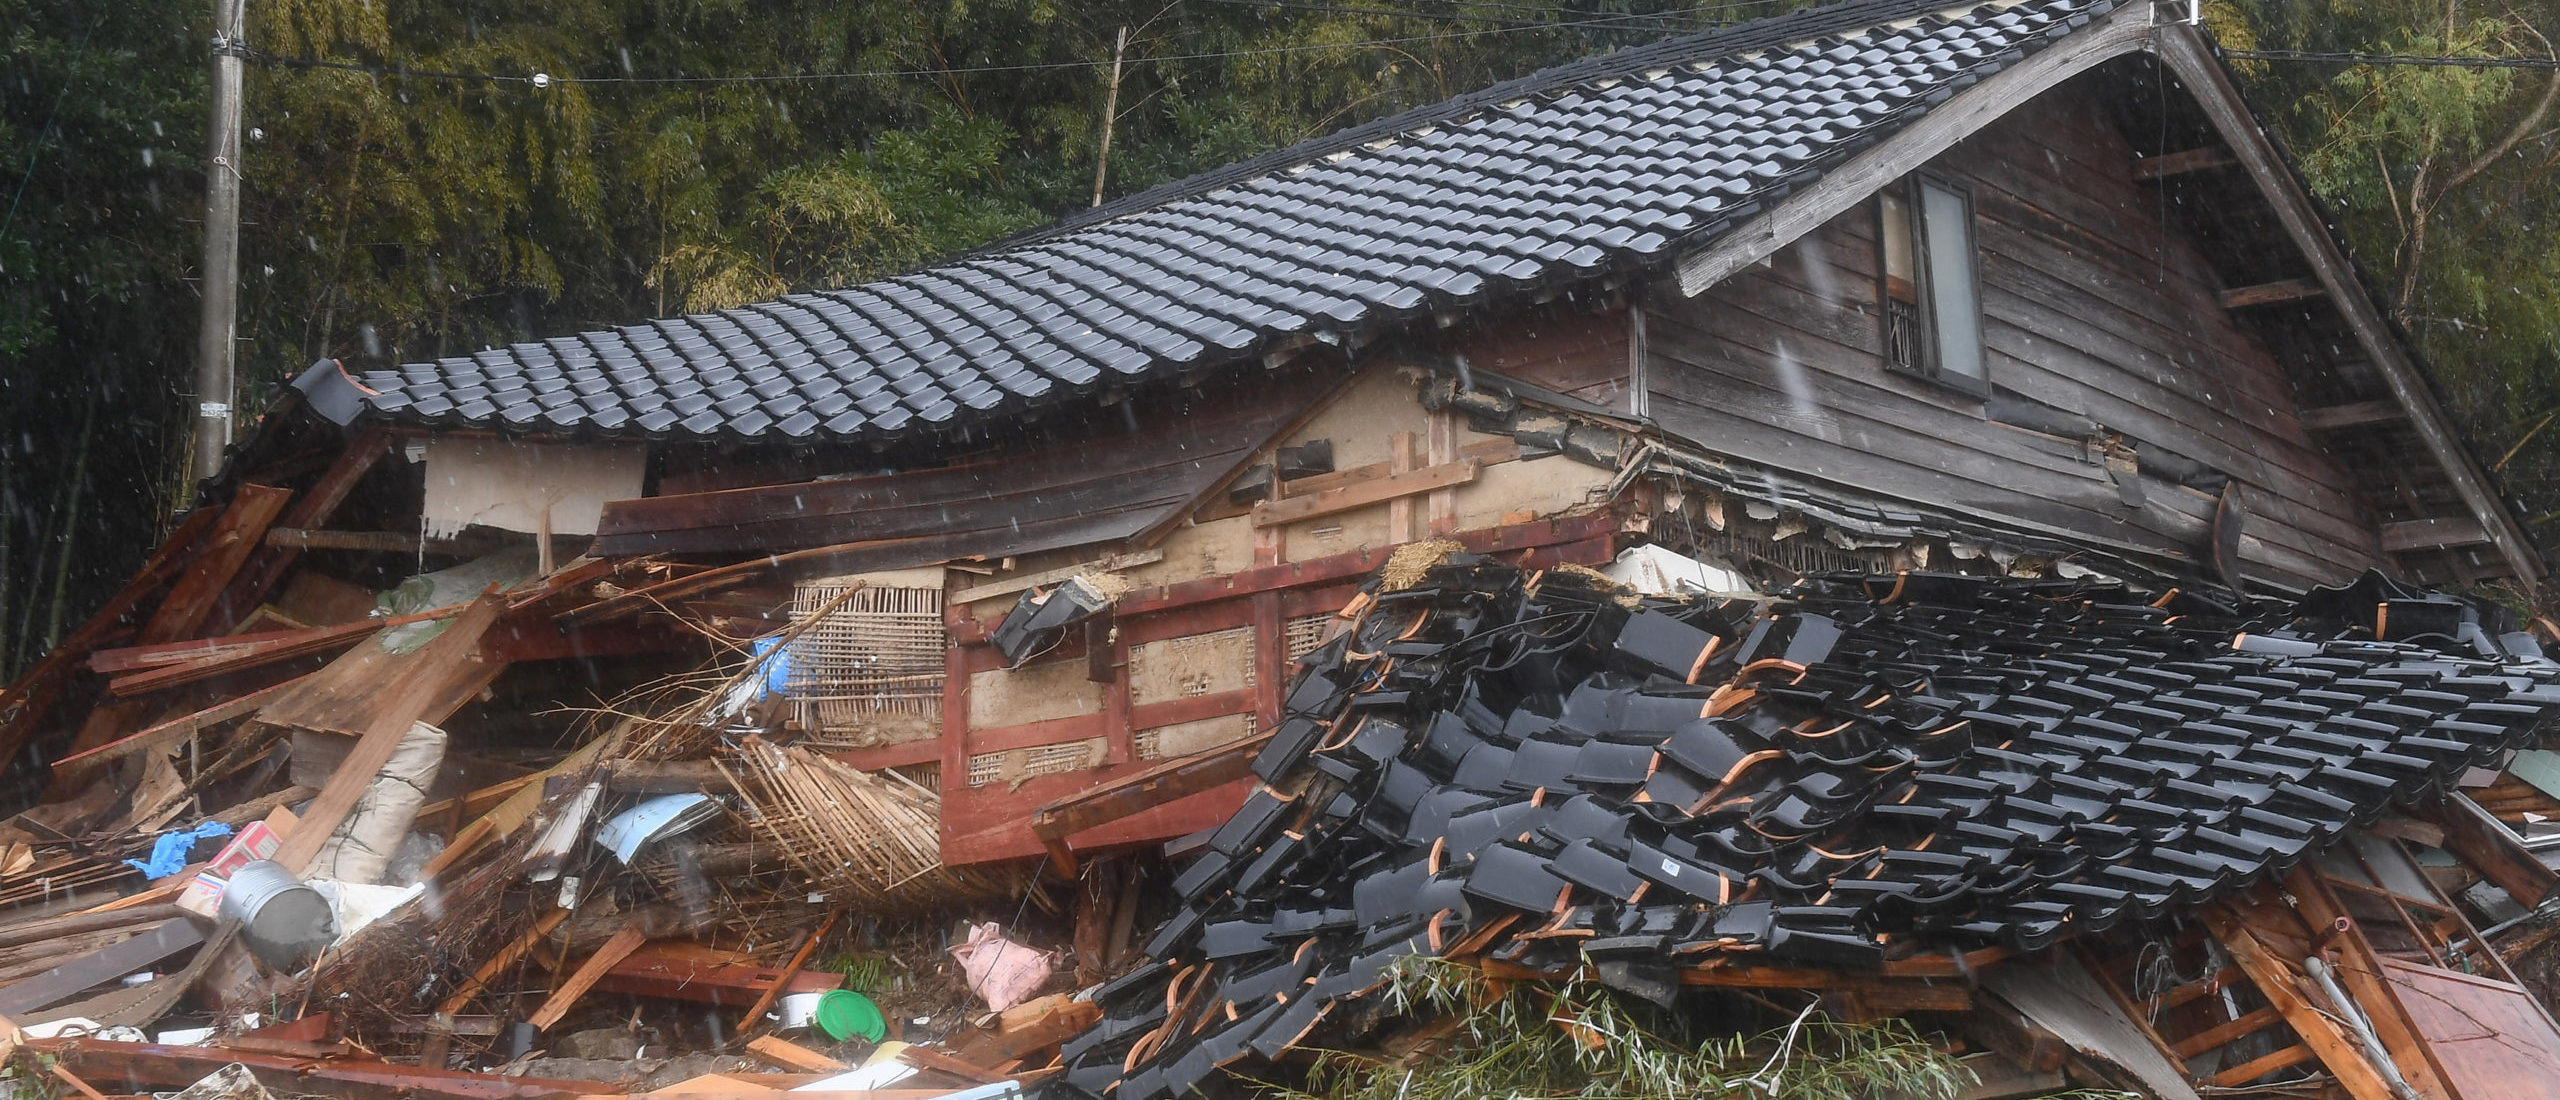 Woman In Her 90s Found Alive Under Rubble Five Days After Devastating Japan Earthquake